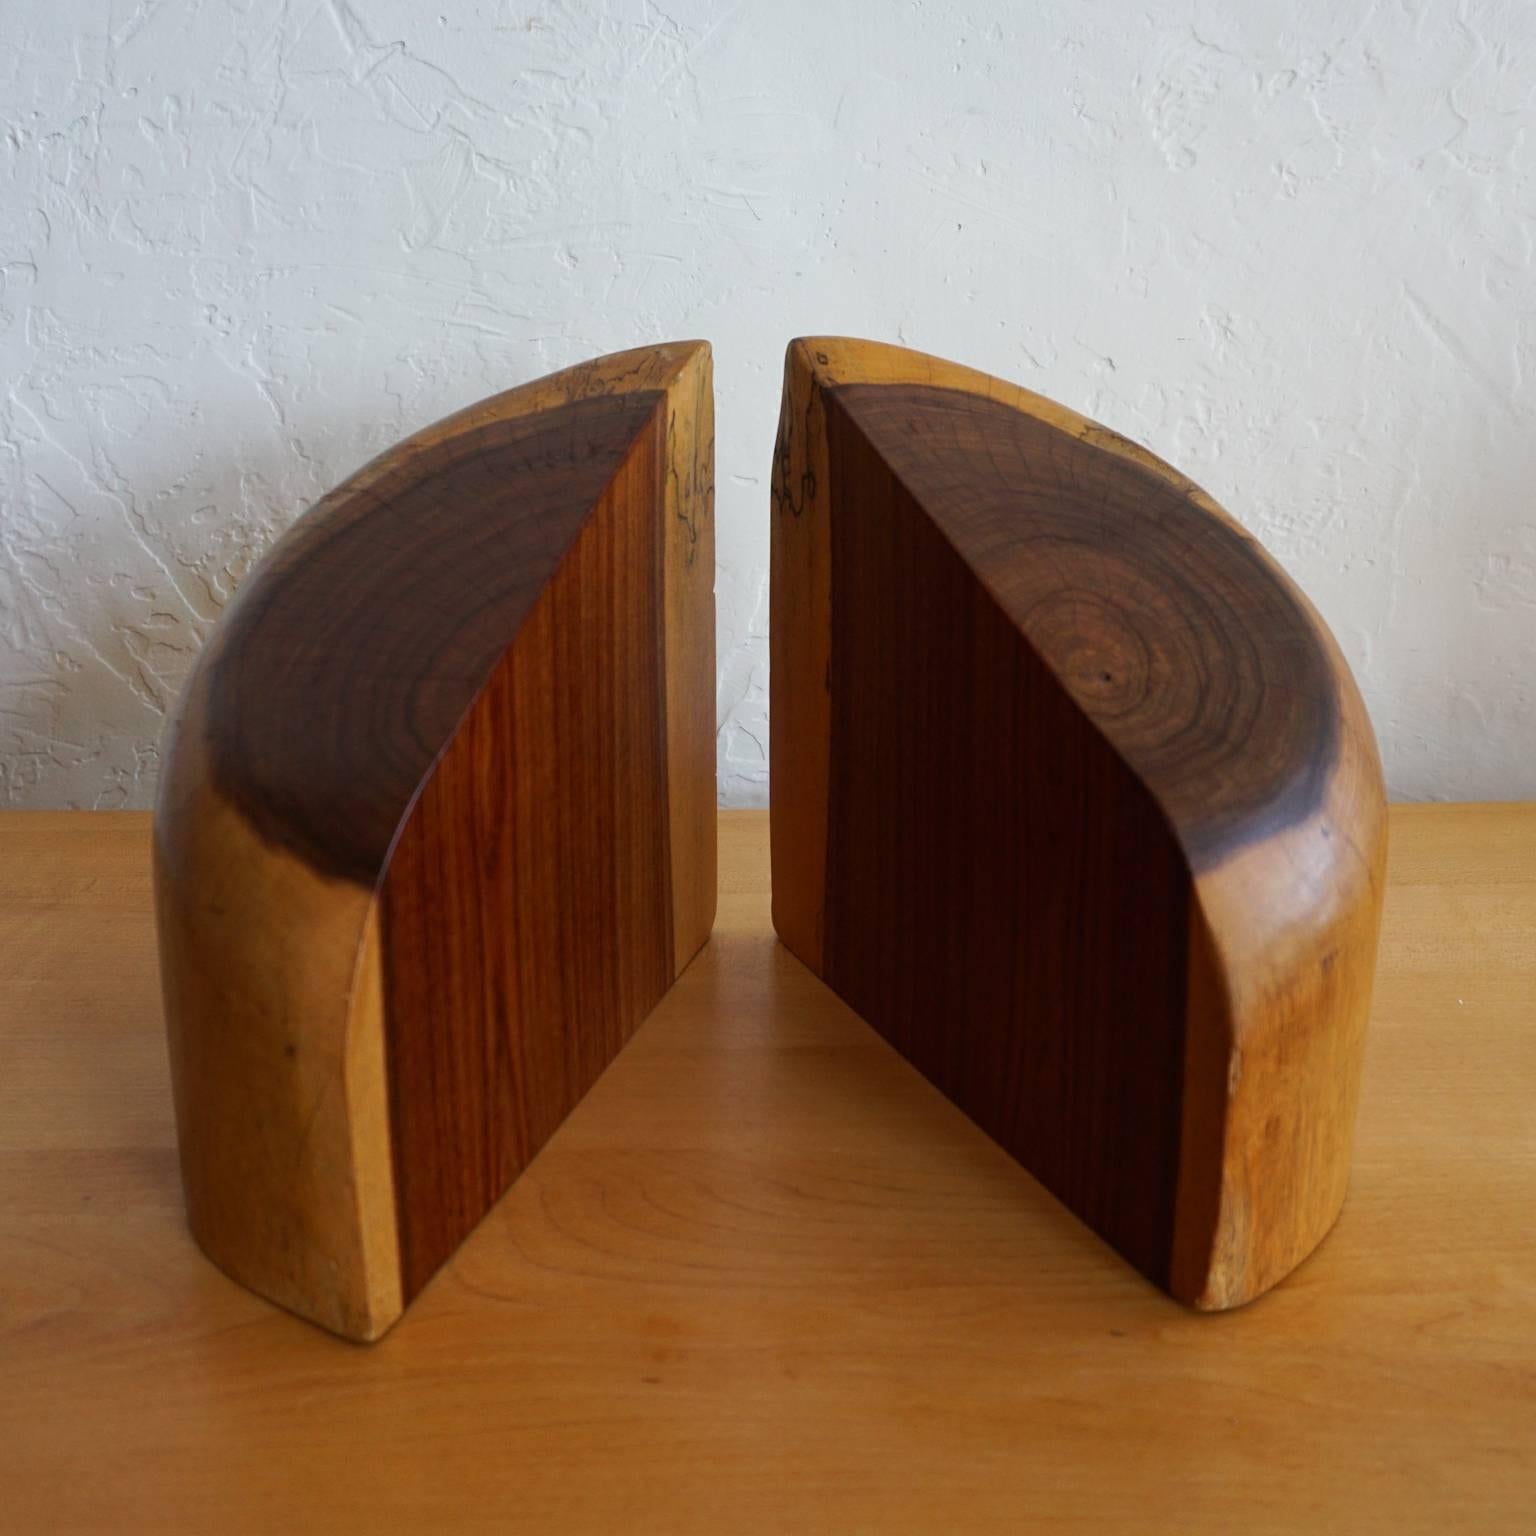 Hand-Carved 1960s Mexican Modern Bookends by Don Shoemaker